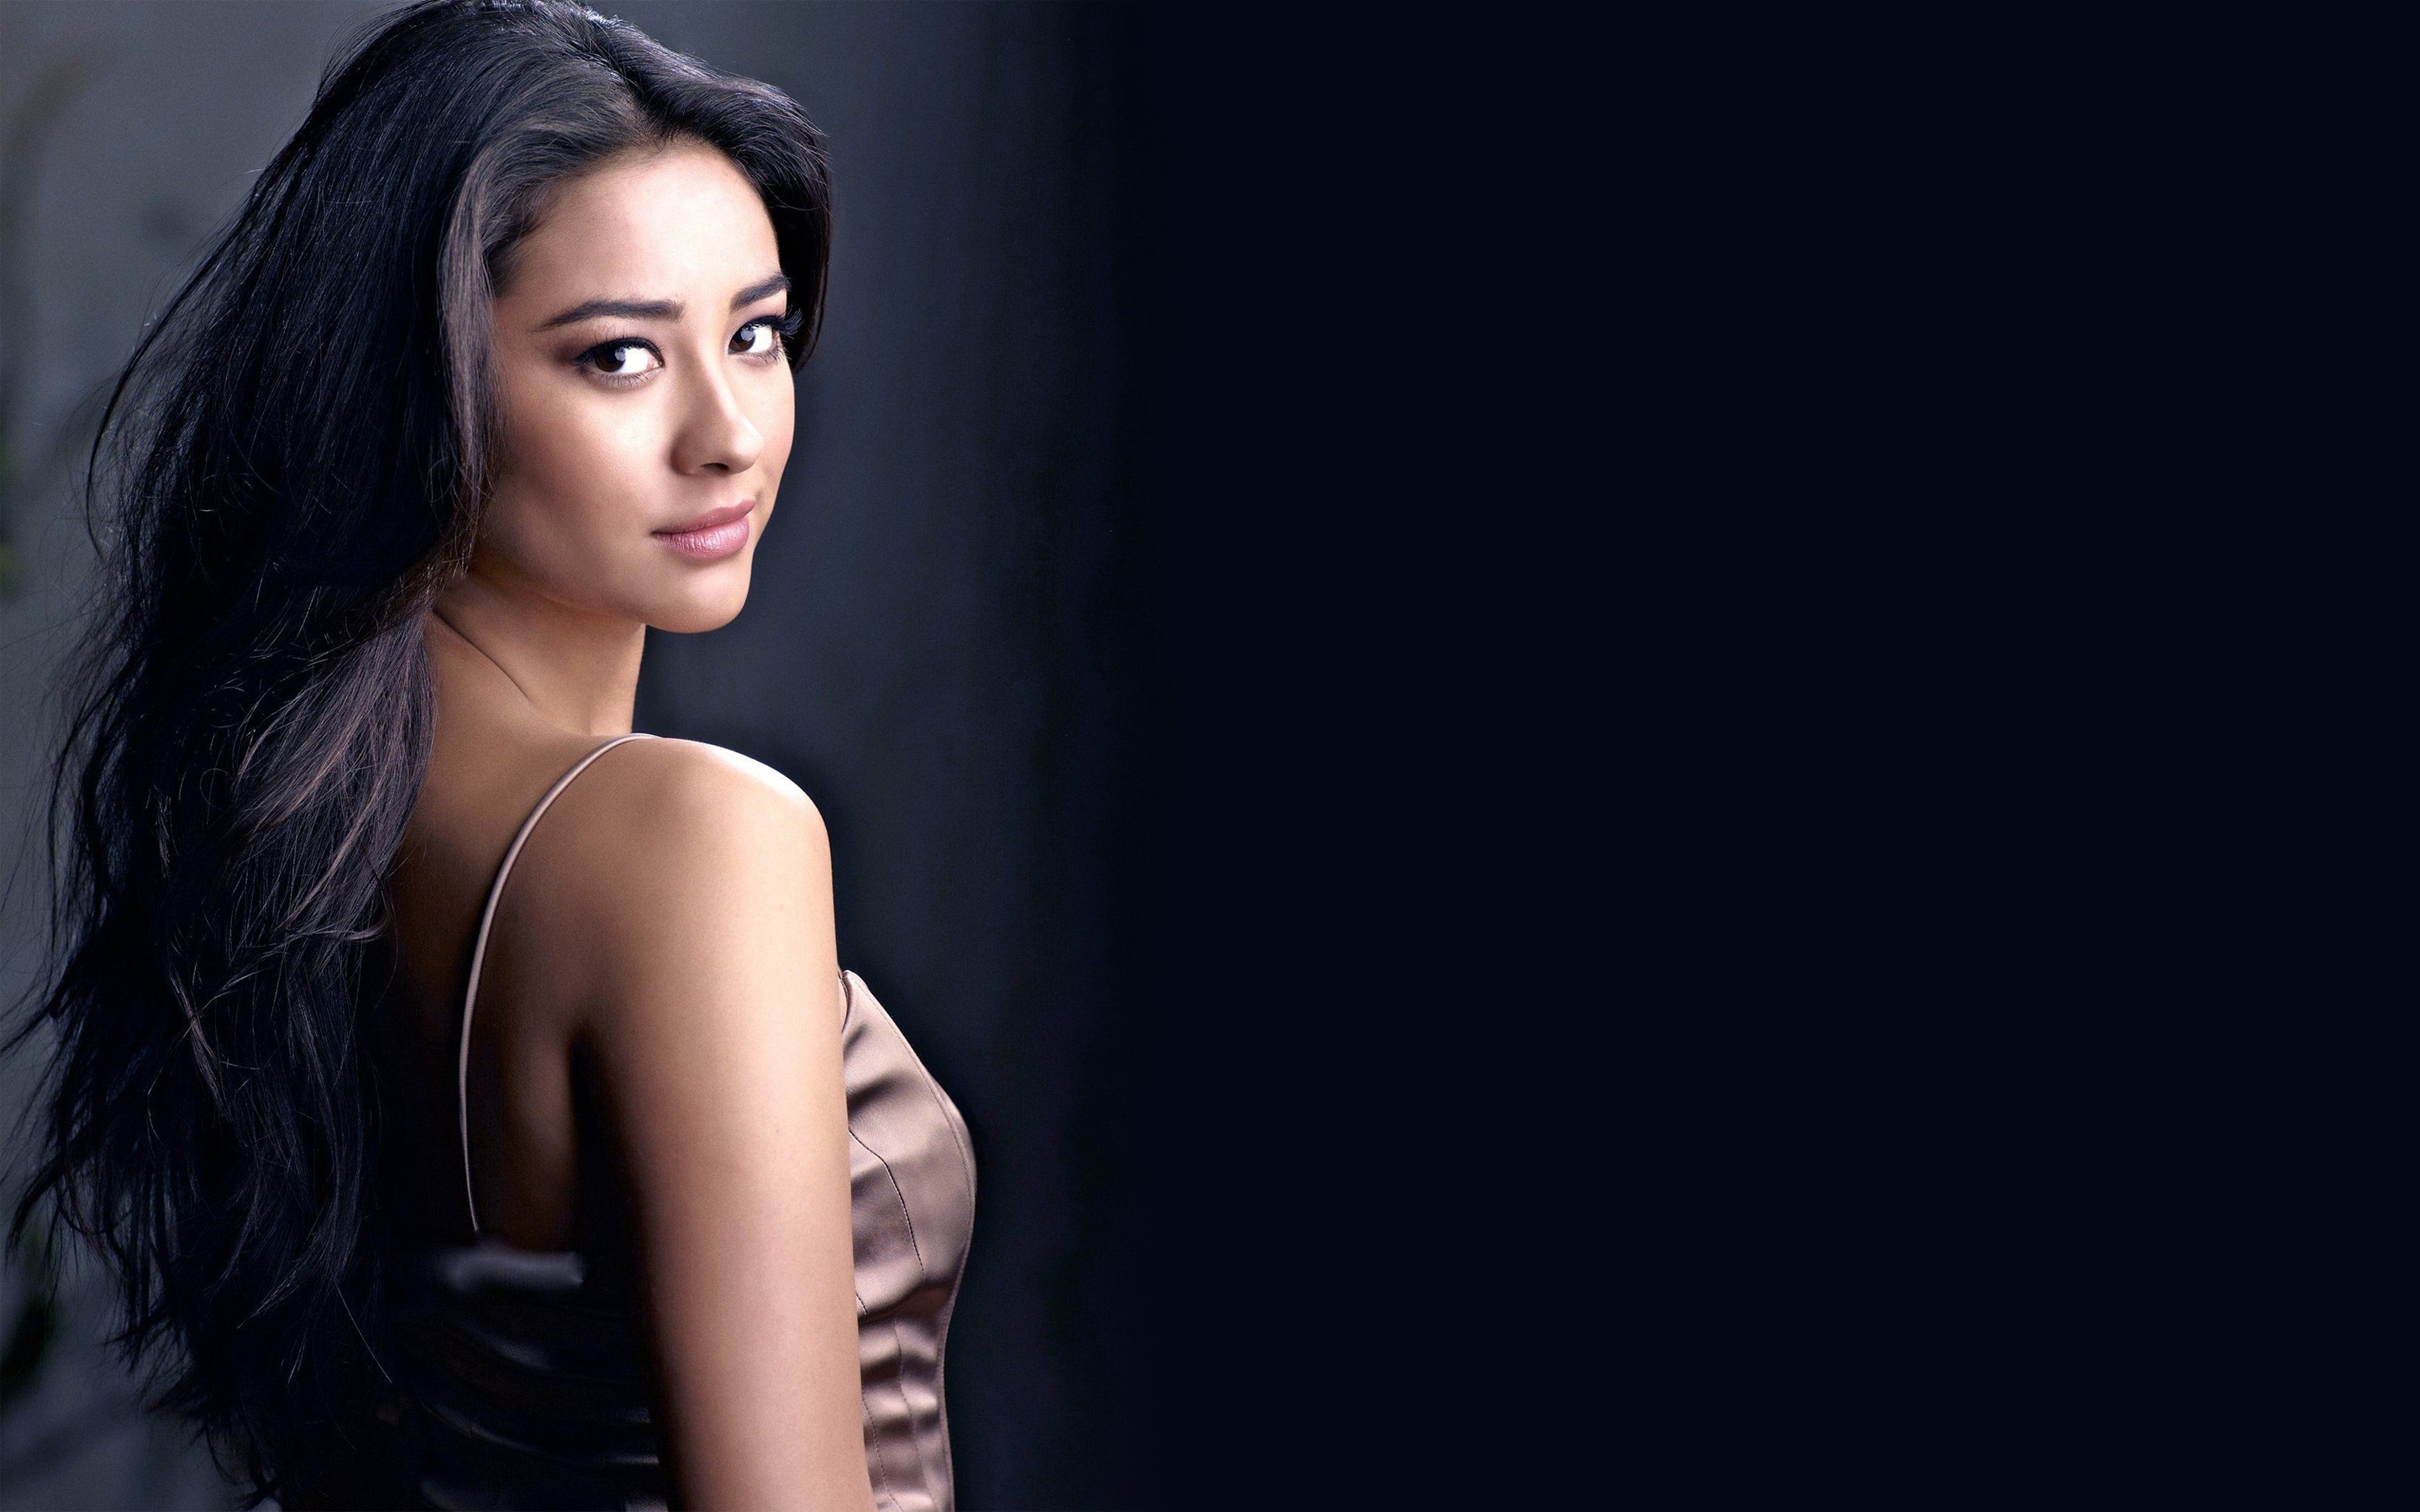 Shay Mitchell Cool for 2880 x 1800 Retina Display resolution